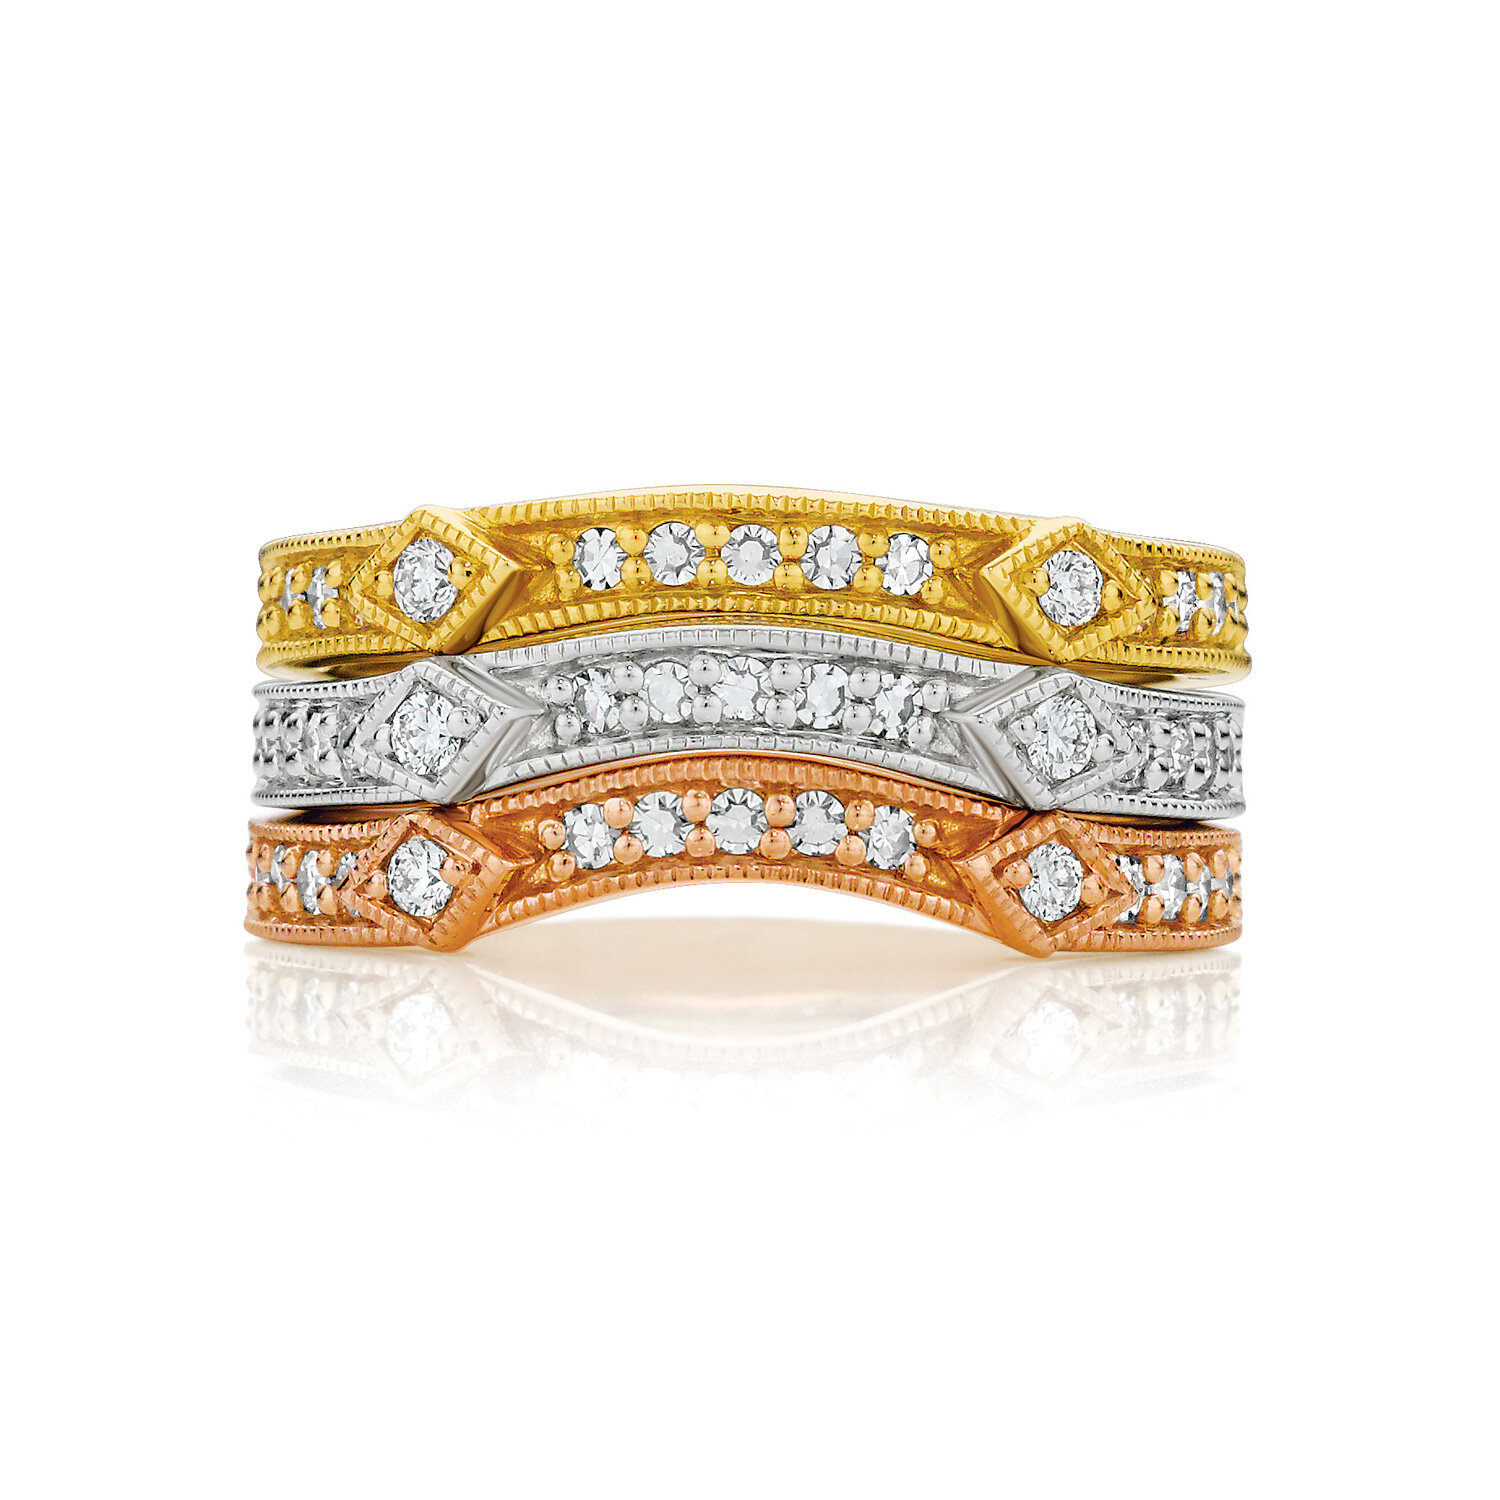 Belle Epoque Bands in Yellow, White and Rose Gold